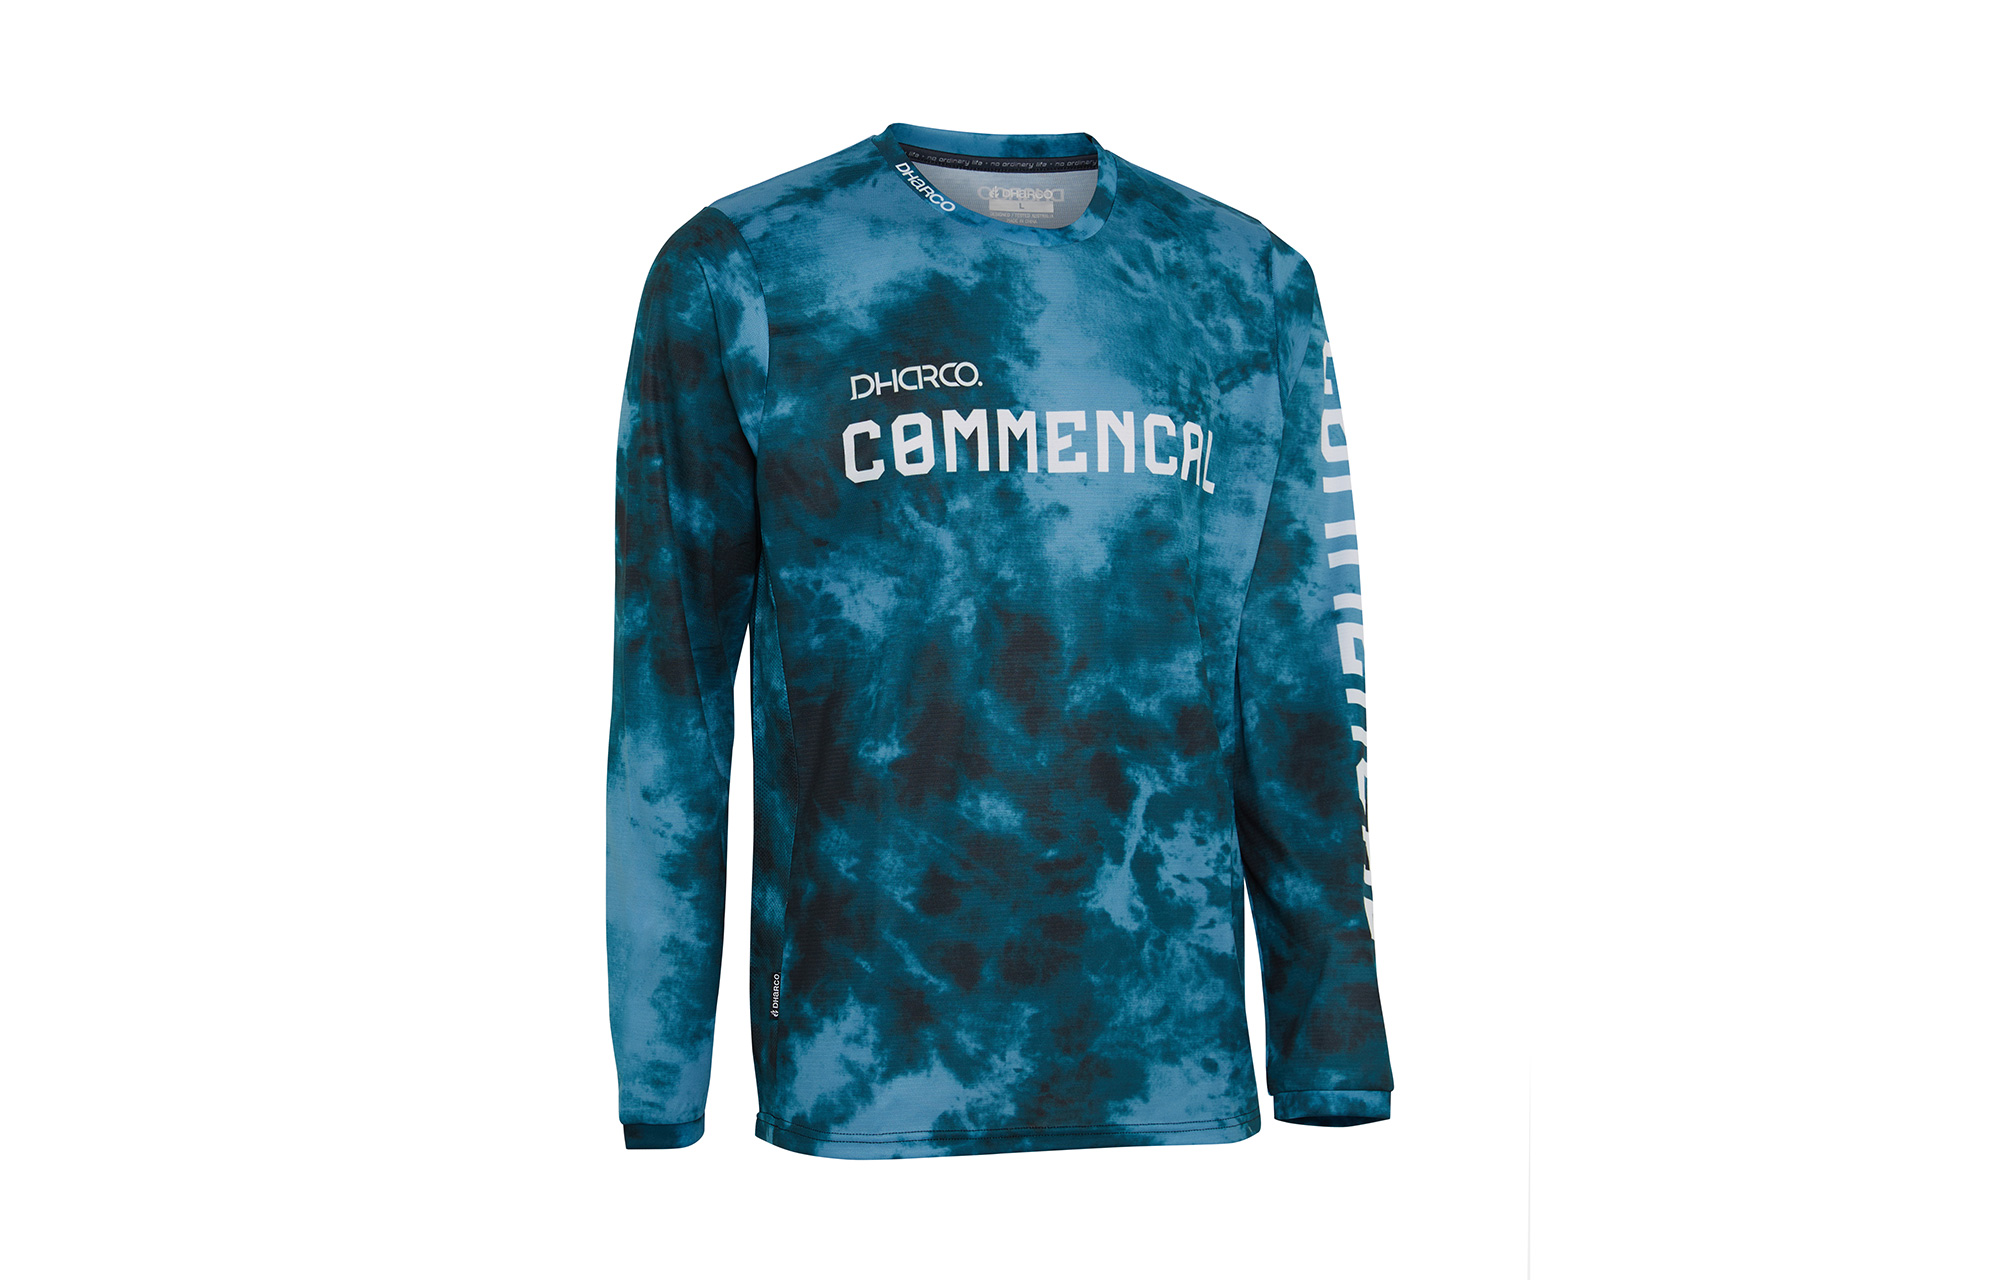 COMMENCAL-DHARCO LONG SLEEVE TEAM REPLICA JERSEY BLUE image number 0